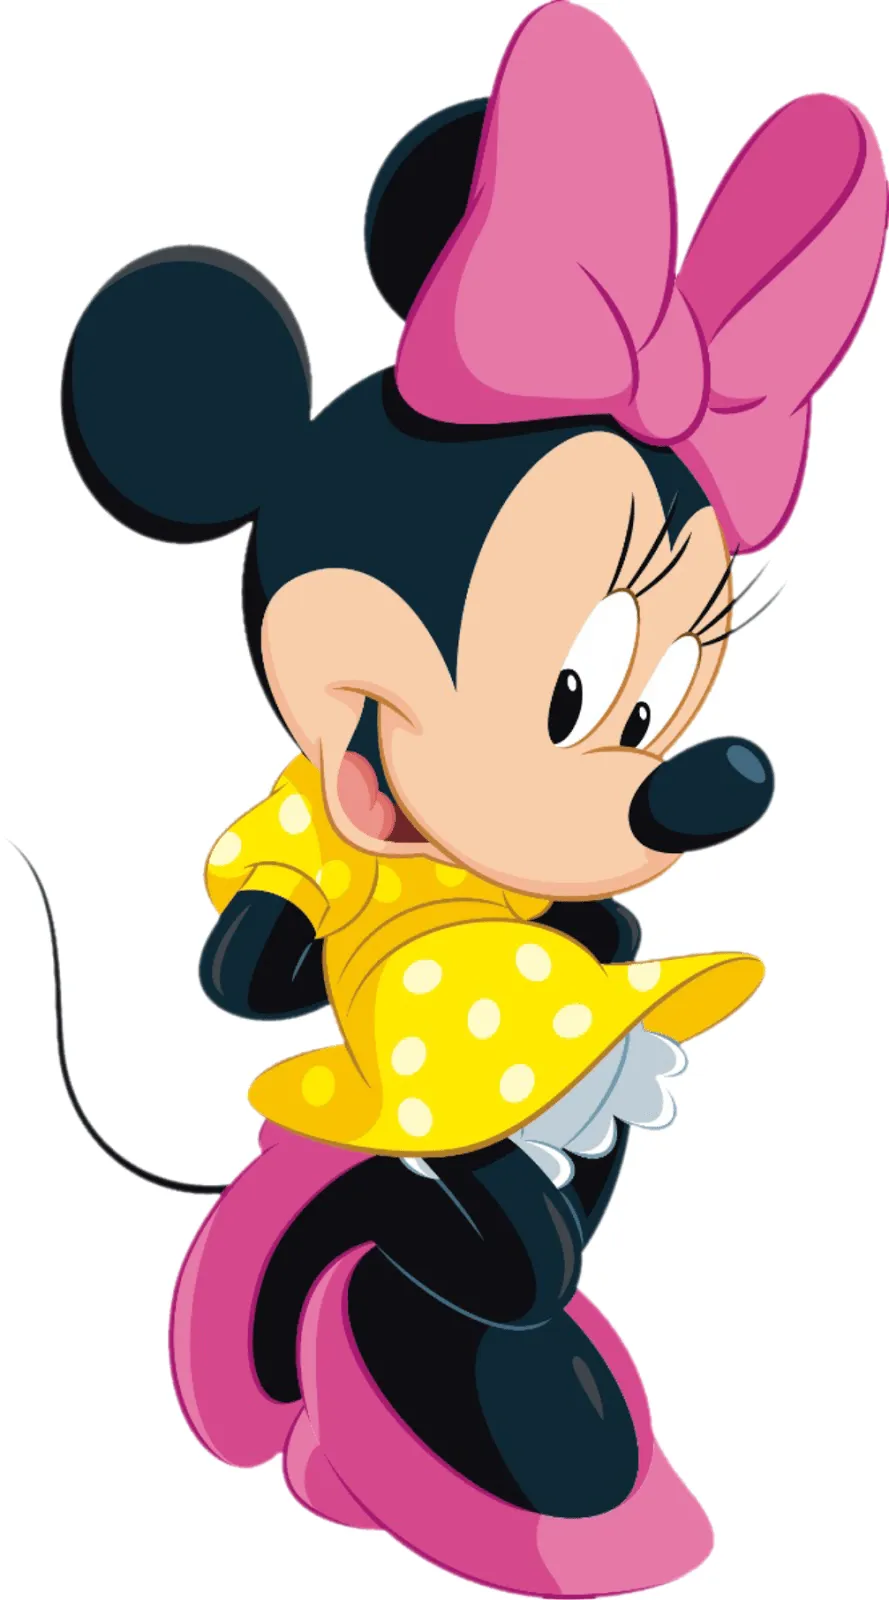 Pink Minnie Mouse Png | Clipart Panda - Free Clipart Images